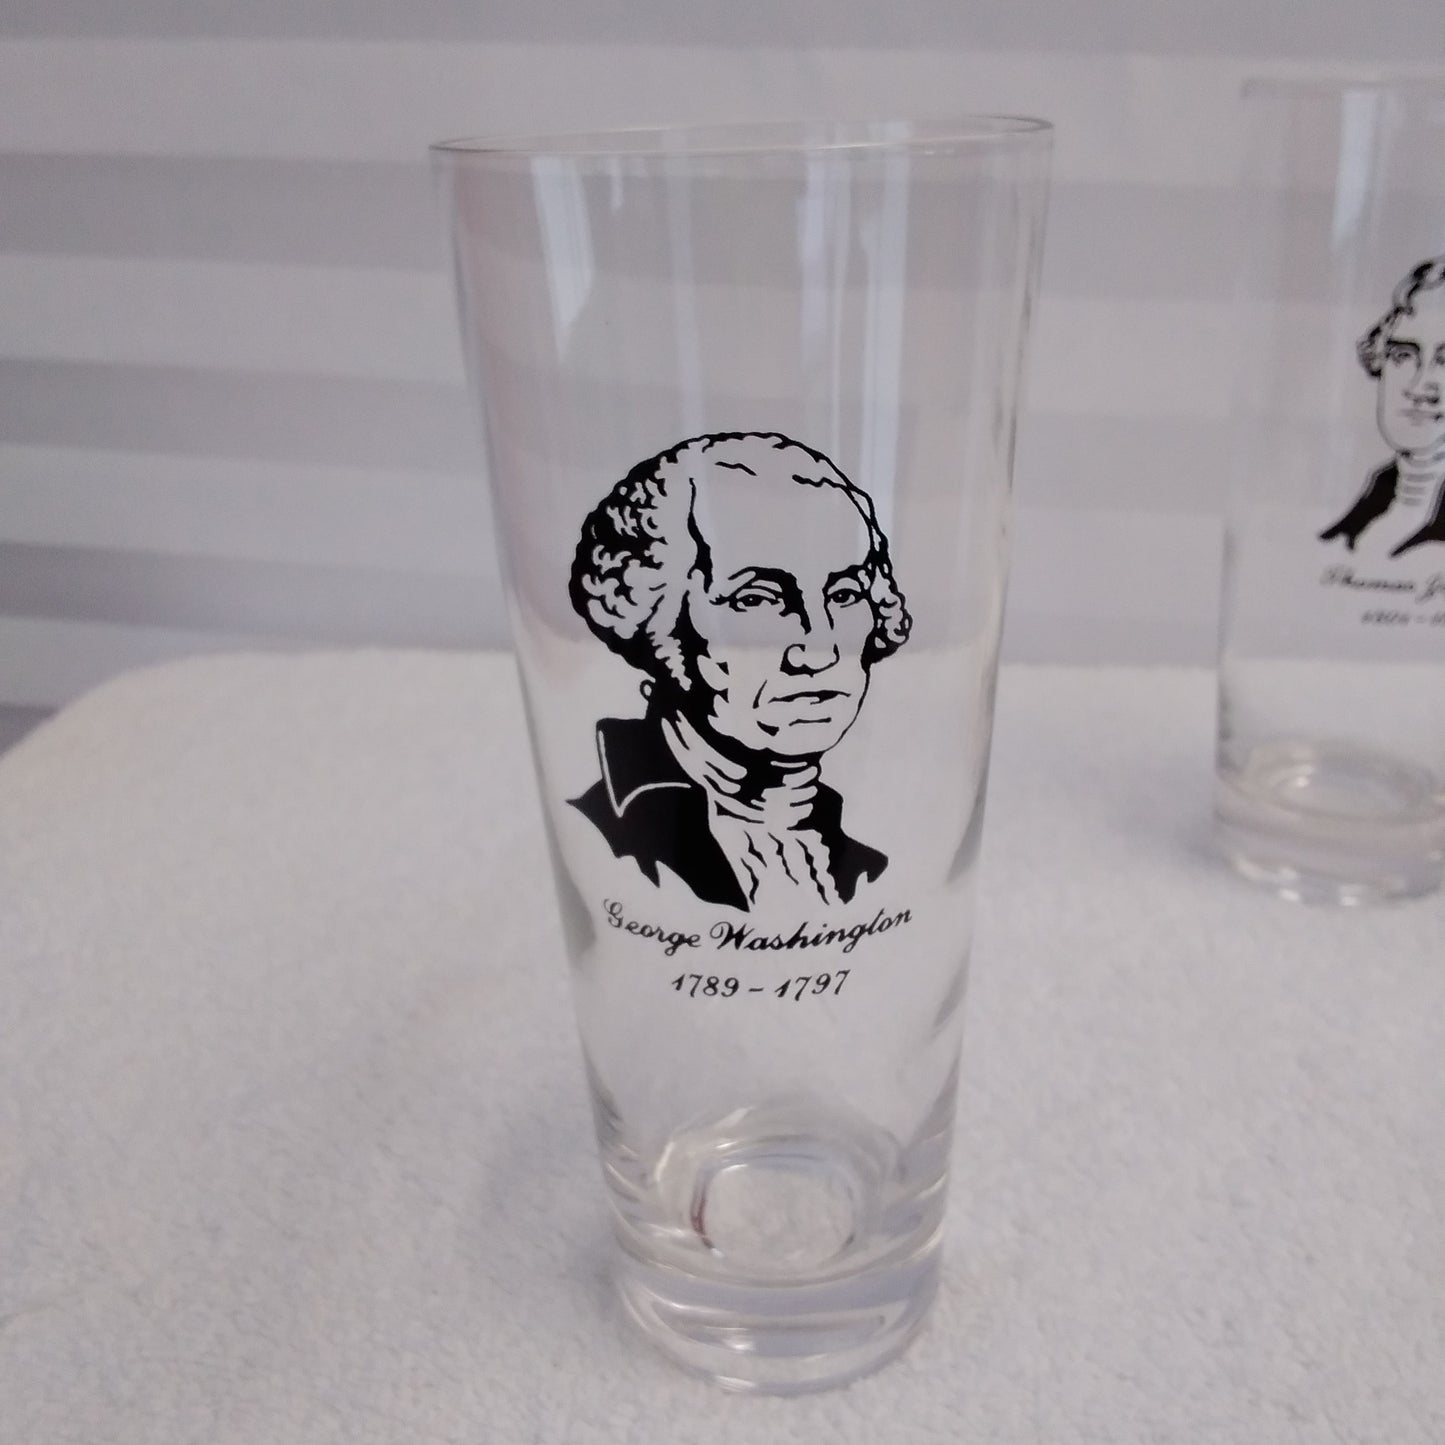 Vintage 1950's Presidential Tall Glass Tumblers - Set of 3